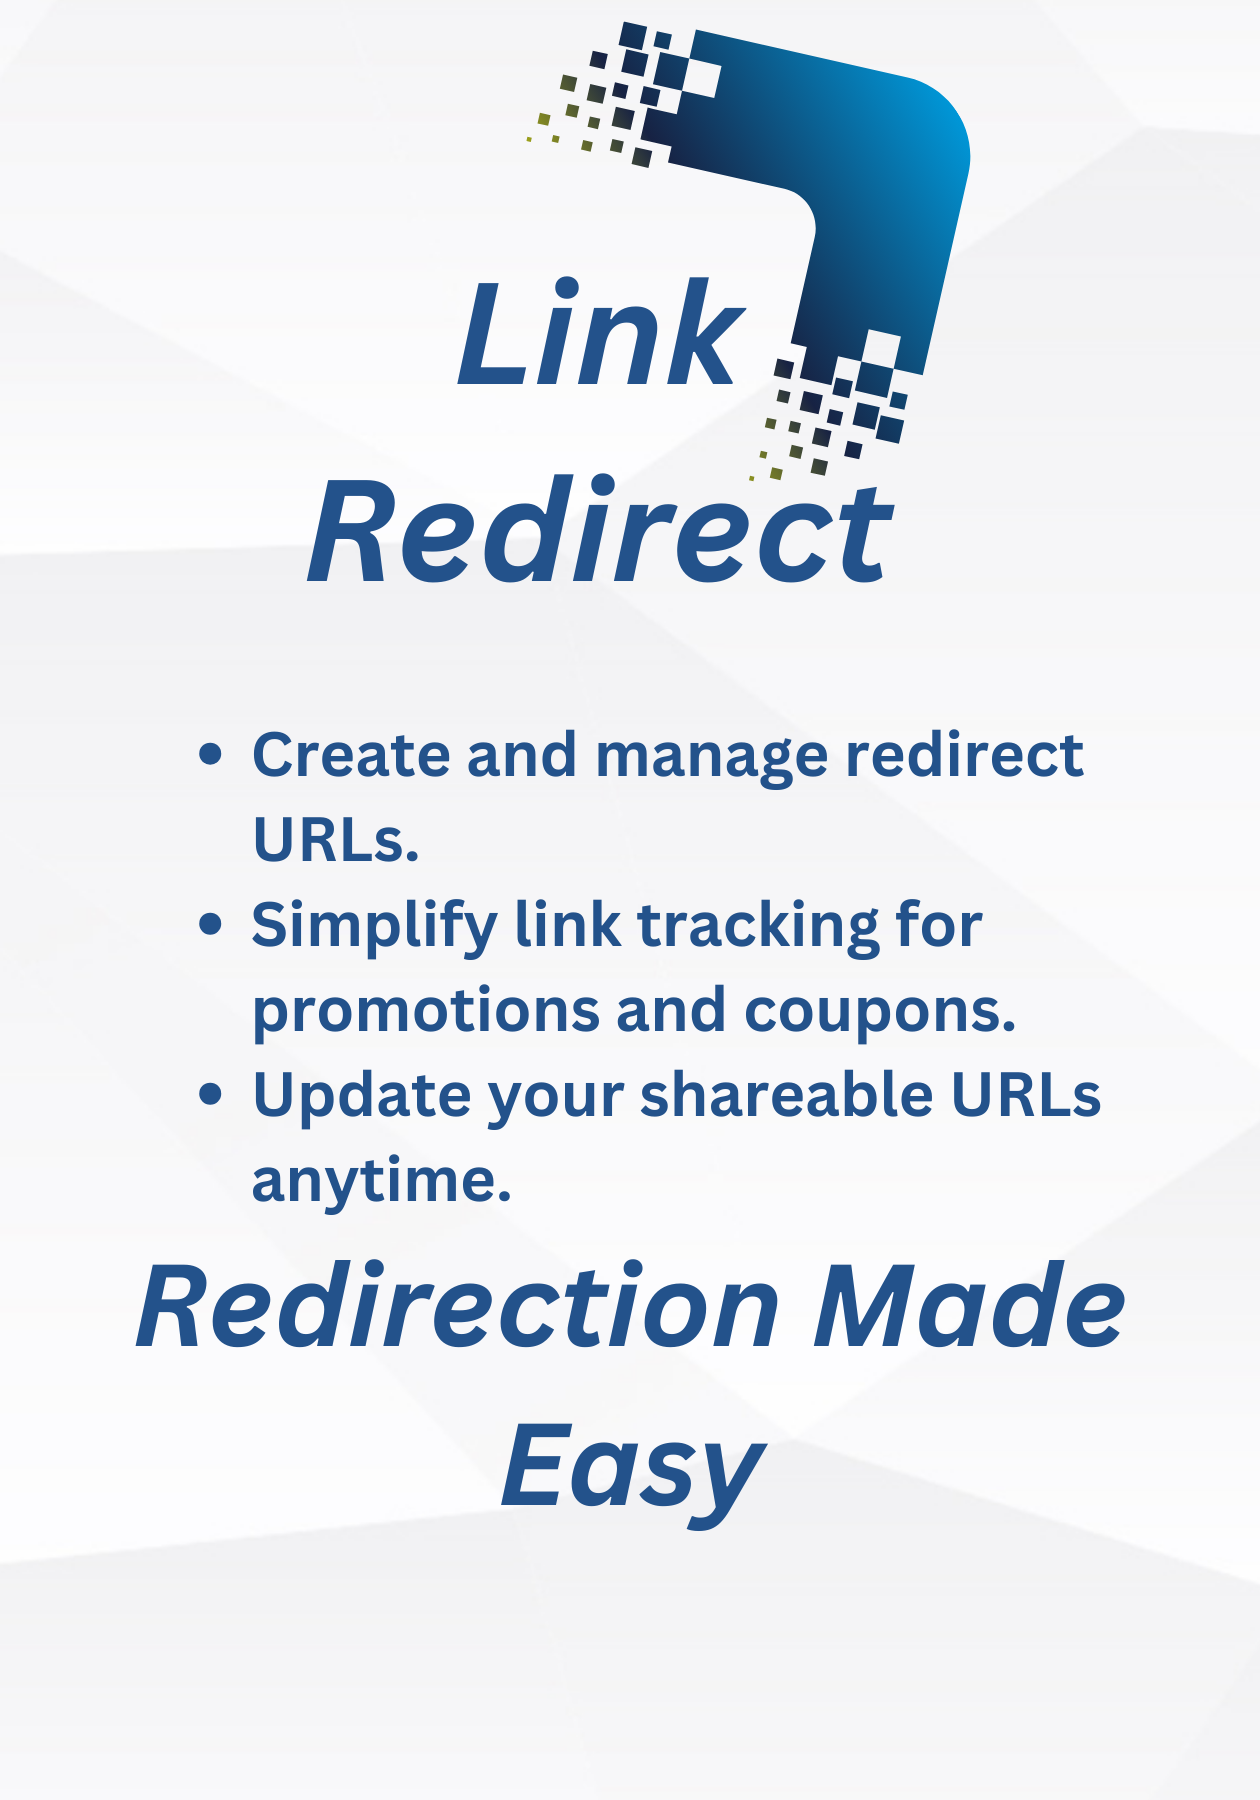 Sign up to the link redirect